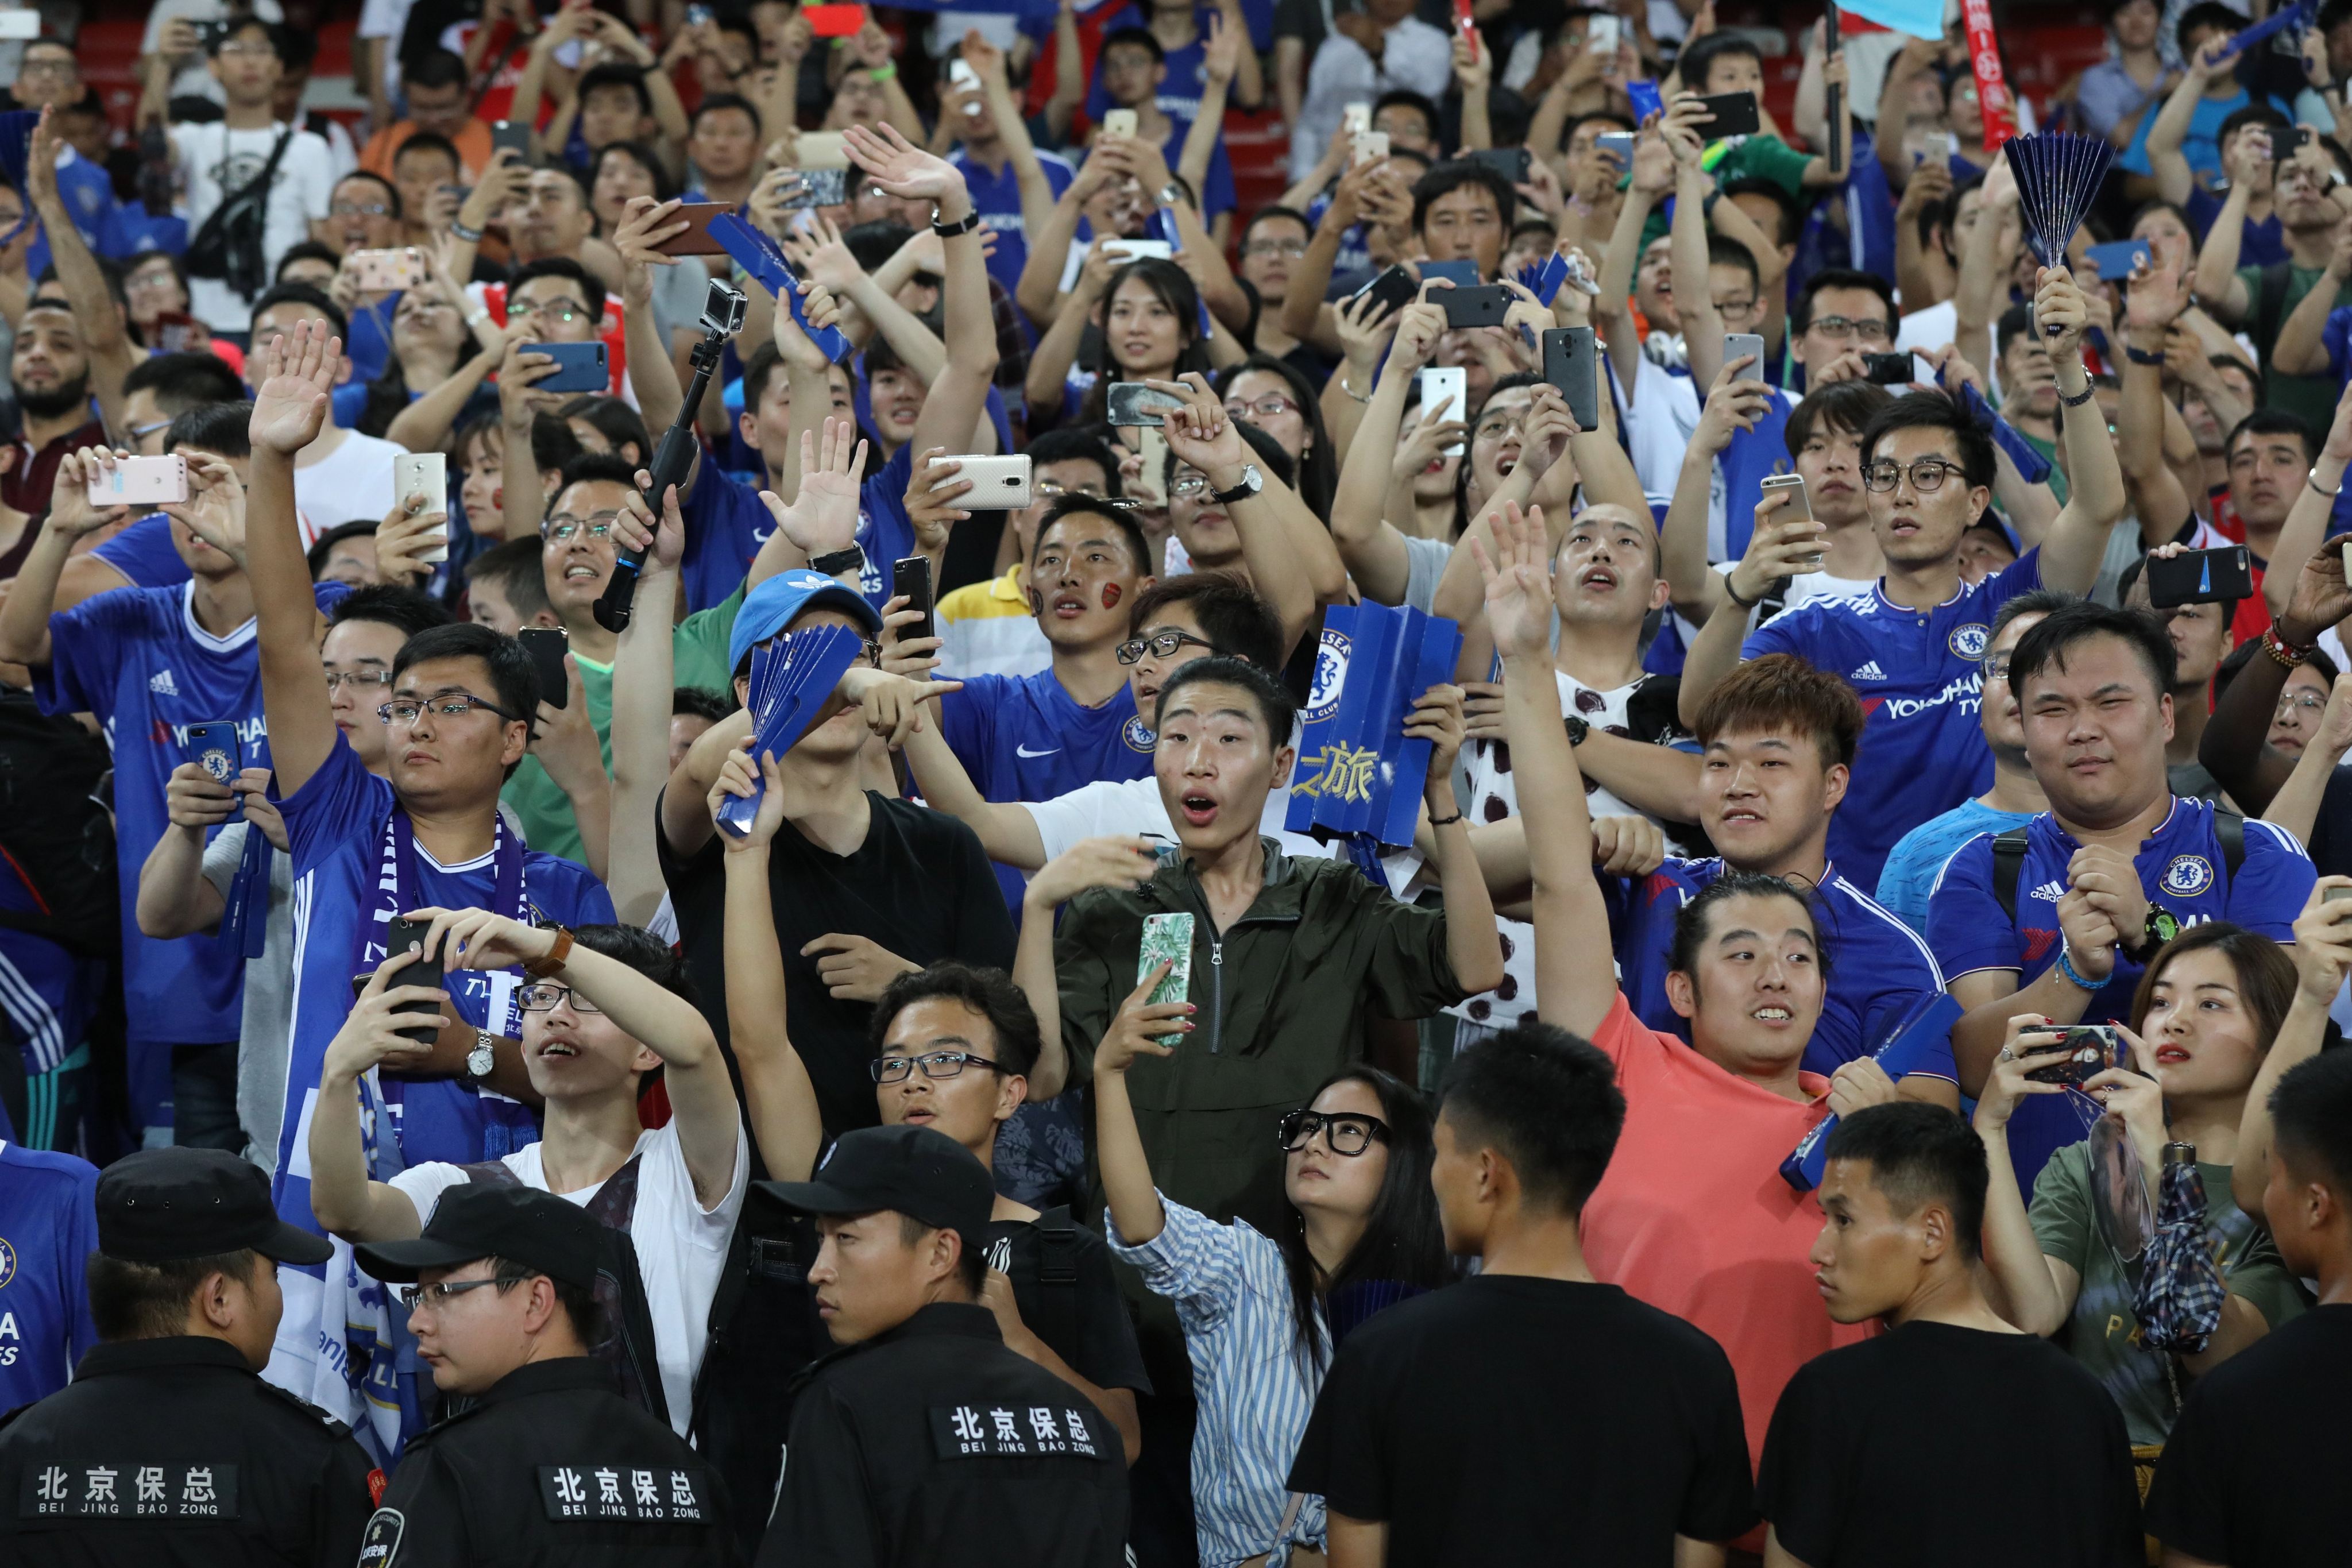 Chelsea supporters during the pre-season friendly football match between Chelsea FC and Arsenal FC at the Beijing National Stadium in 2017. Photo: EPA